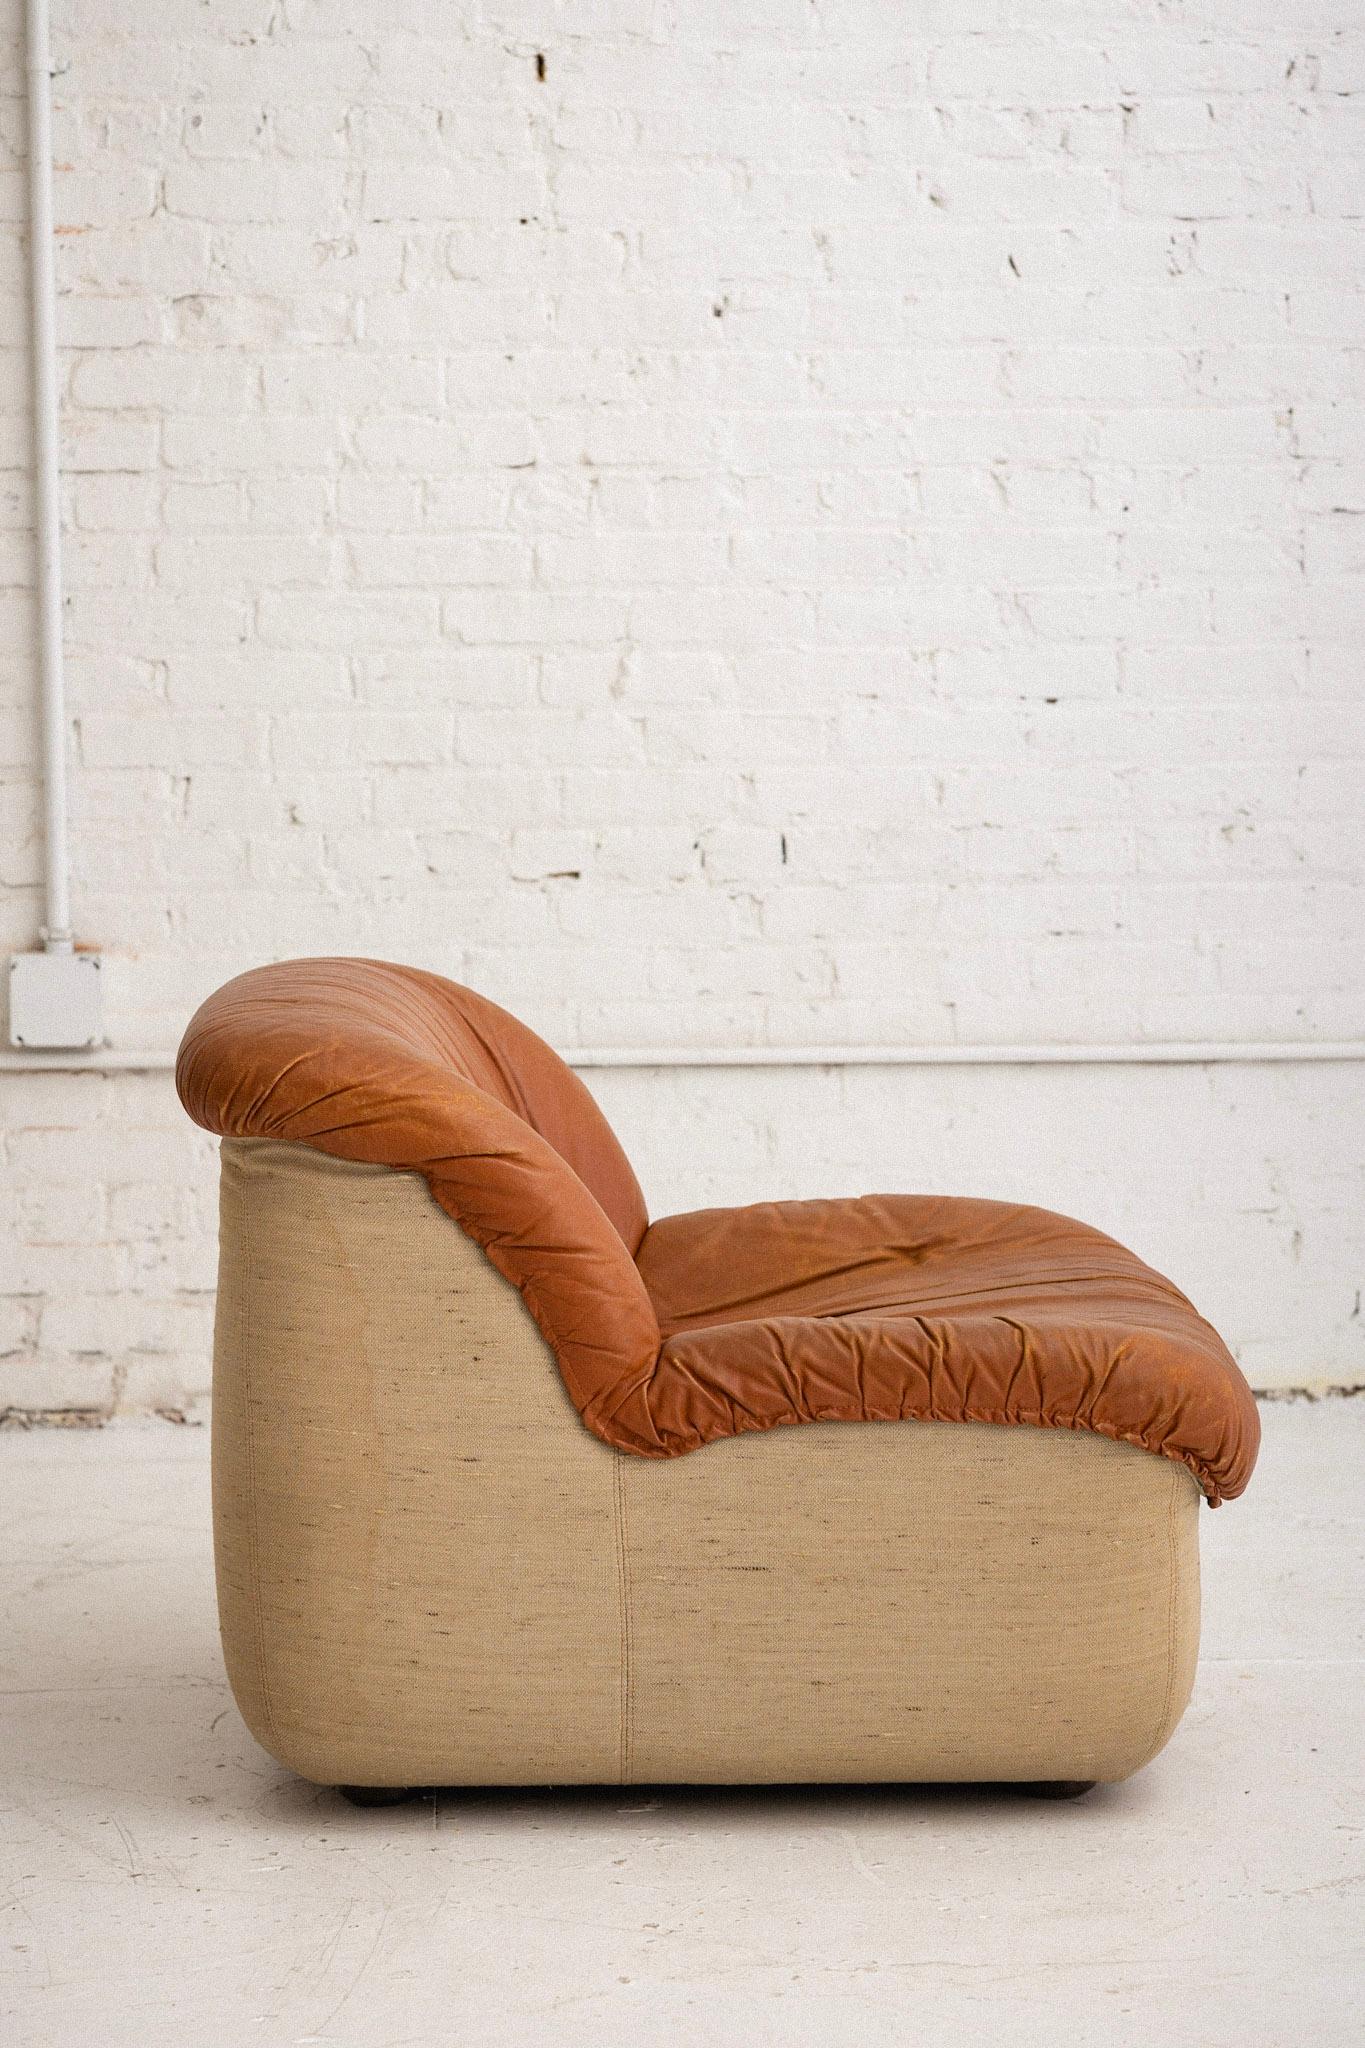 Space Age Henning Korch for Swan ‘Caprice’ Leather Chair / Modular Seating For Sale